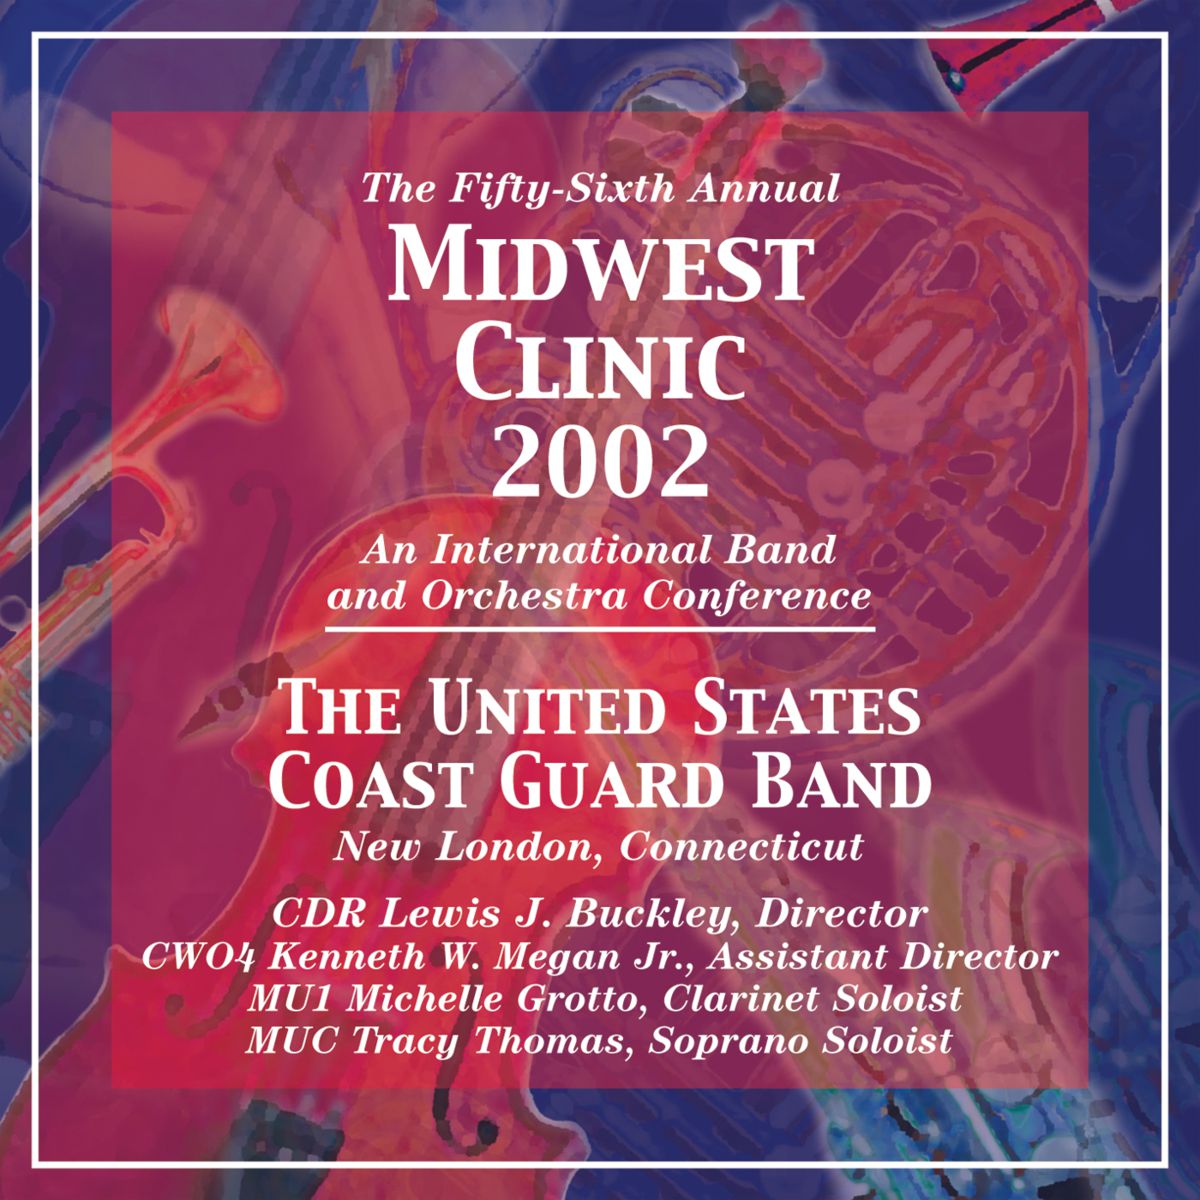 2002 Midwest Clinic: The United States Coast Guard Band - click here